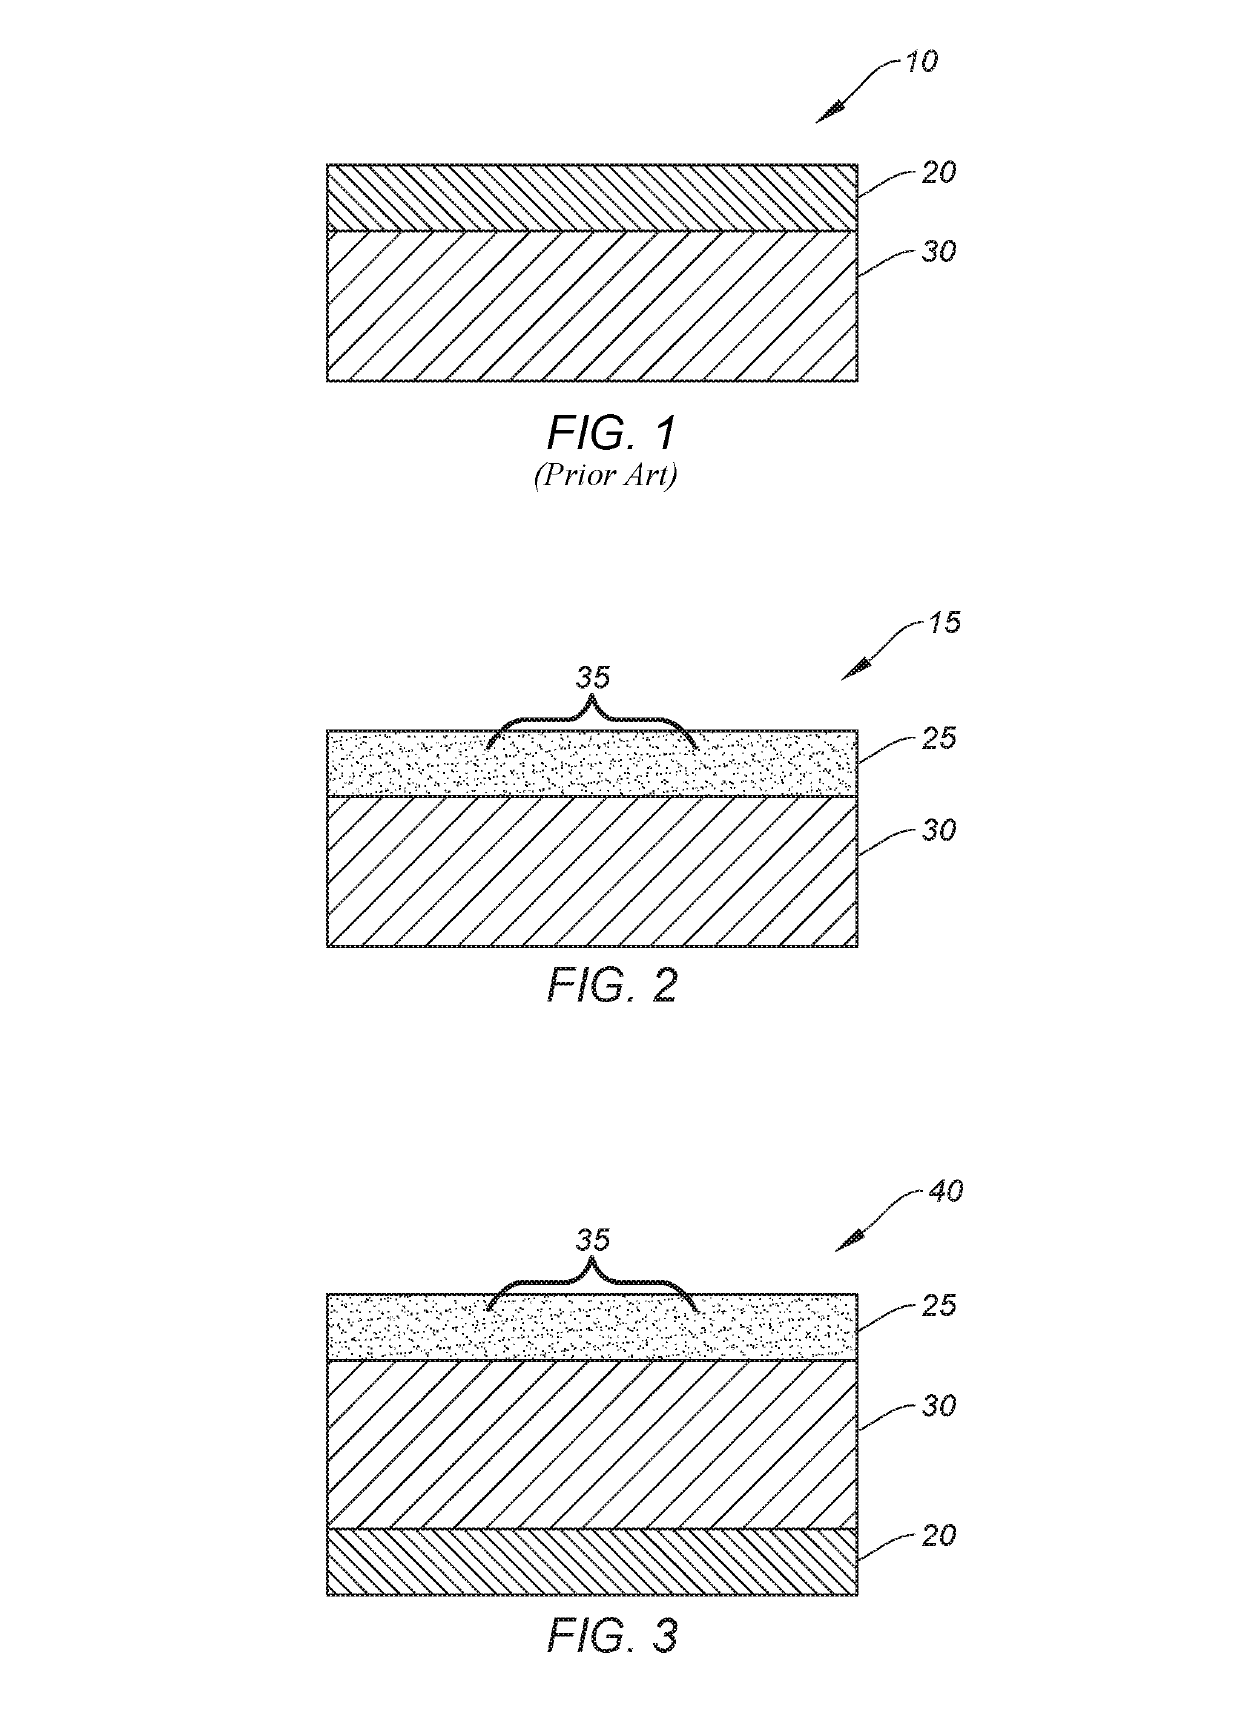 Electrically-conductive compositions